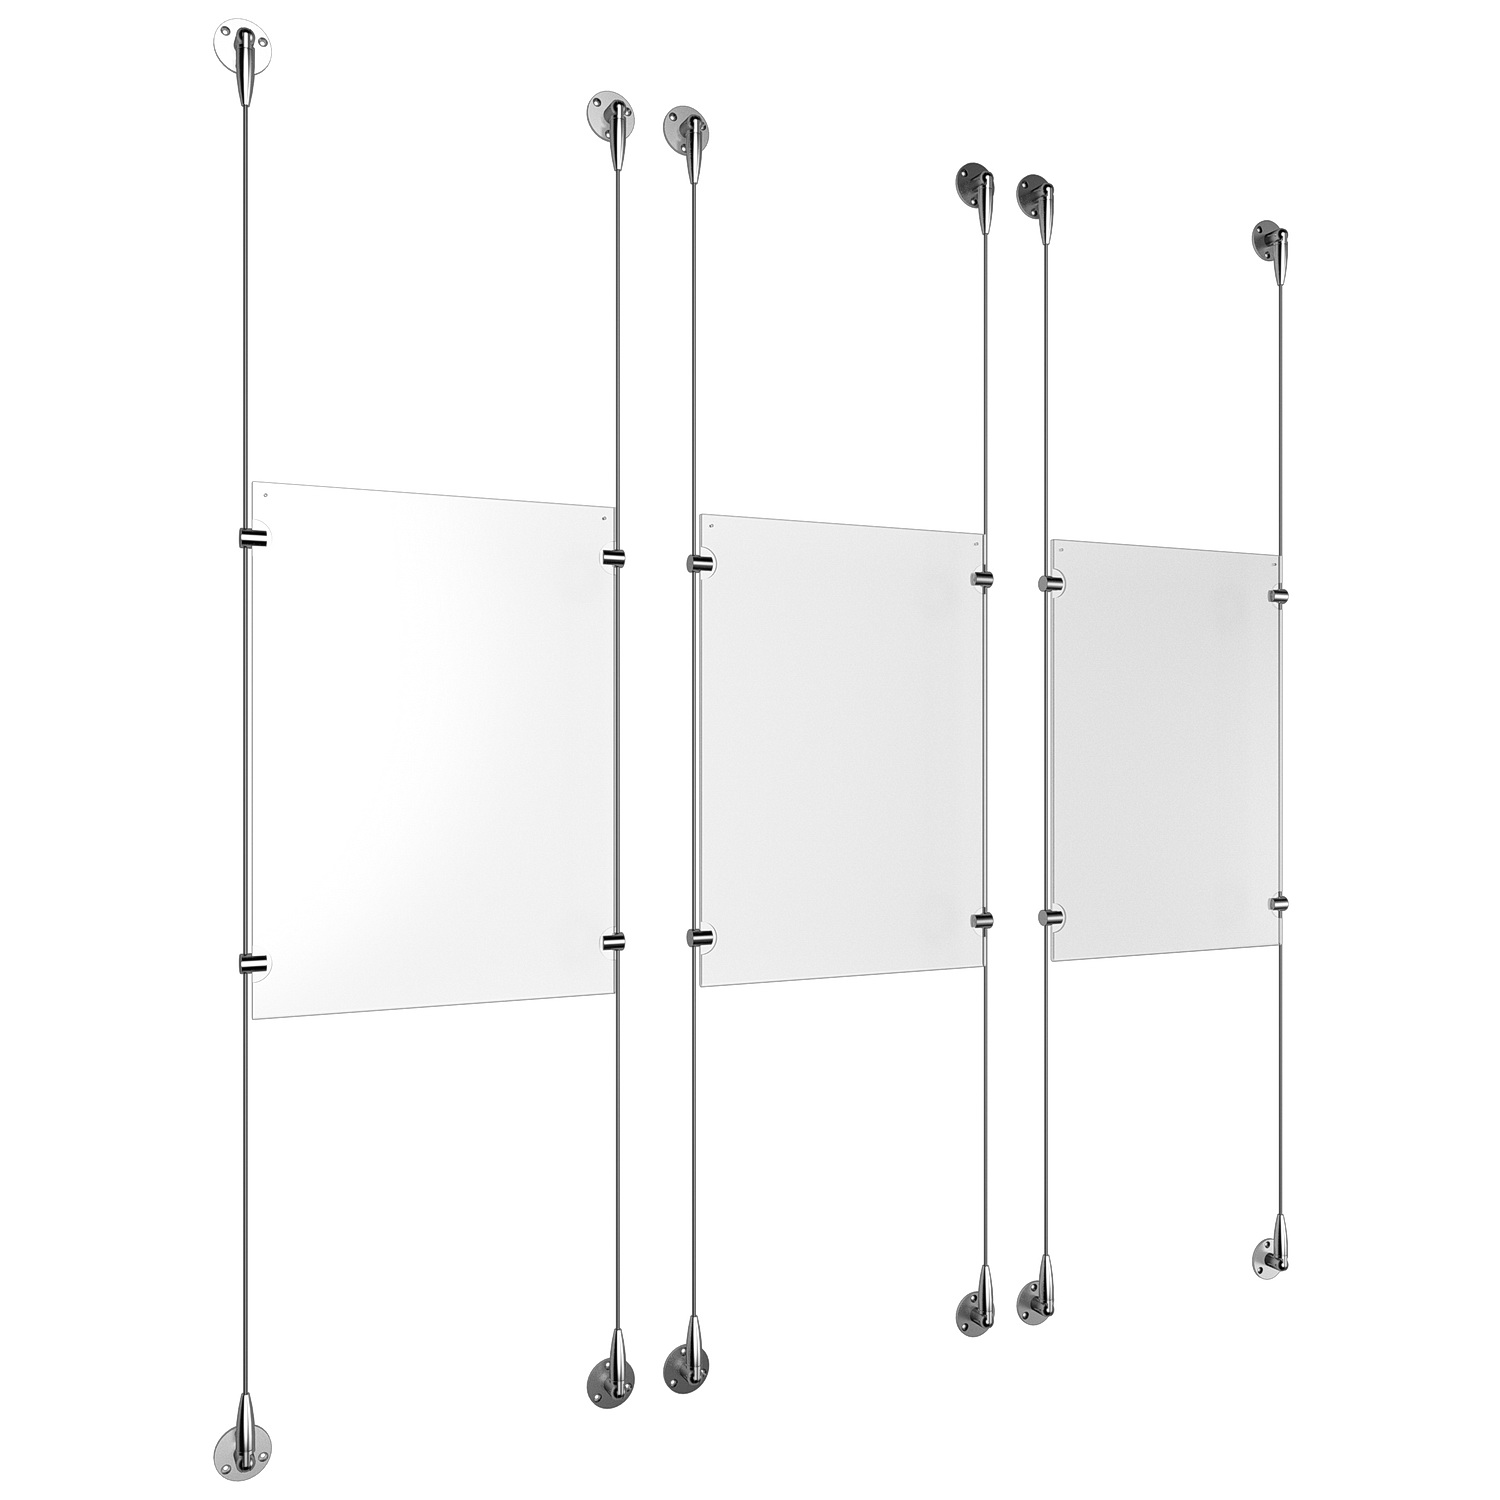 (3) 11'' Width x 17'' Height Clear Acrylic Frame & (6) Stainless Steel Satin Brushed Adjustable Angle Signature 1/8'' Cable Systems with (12) Single-Sided Panel Grippers